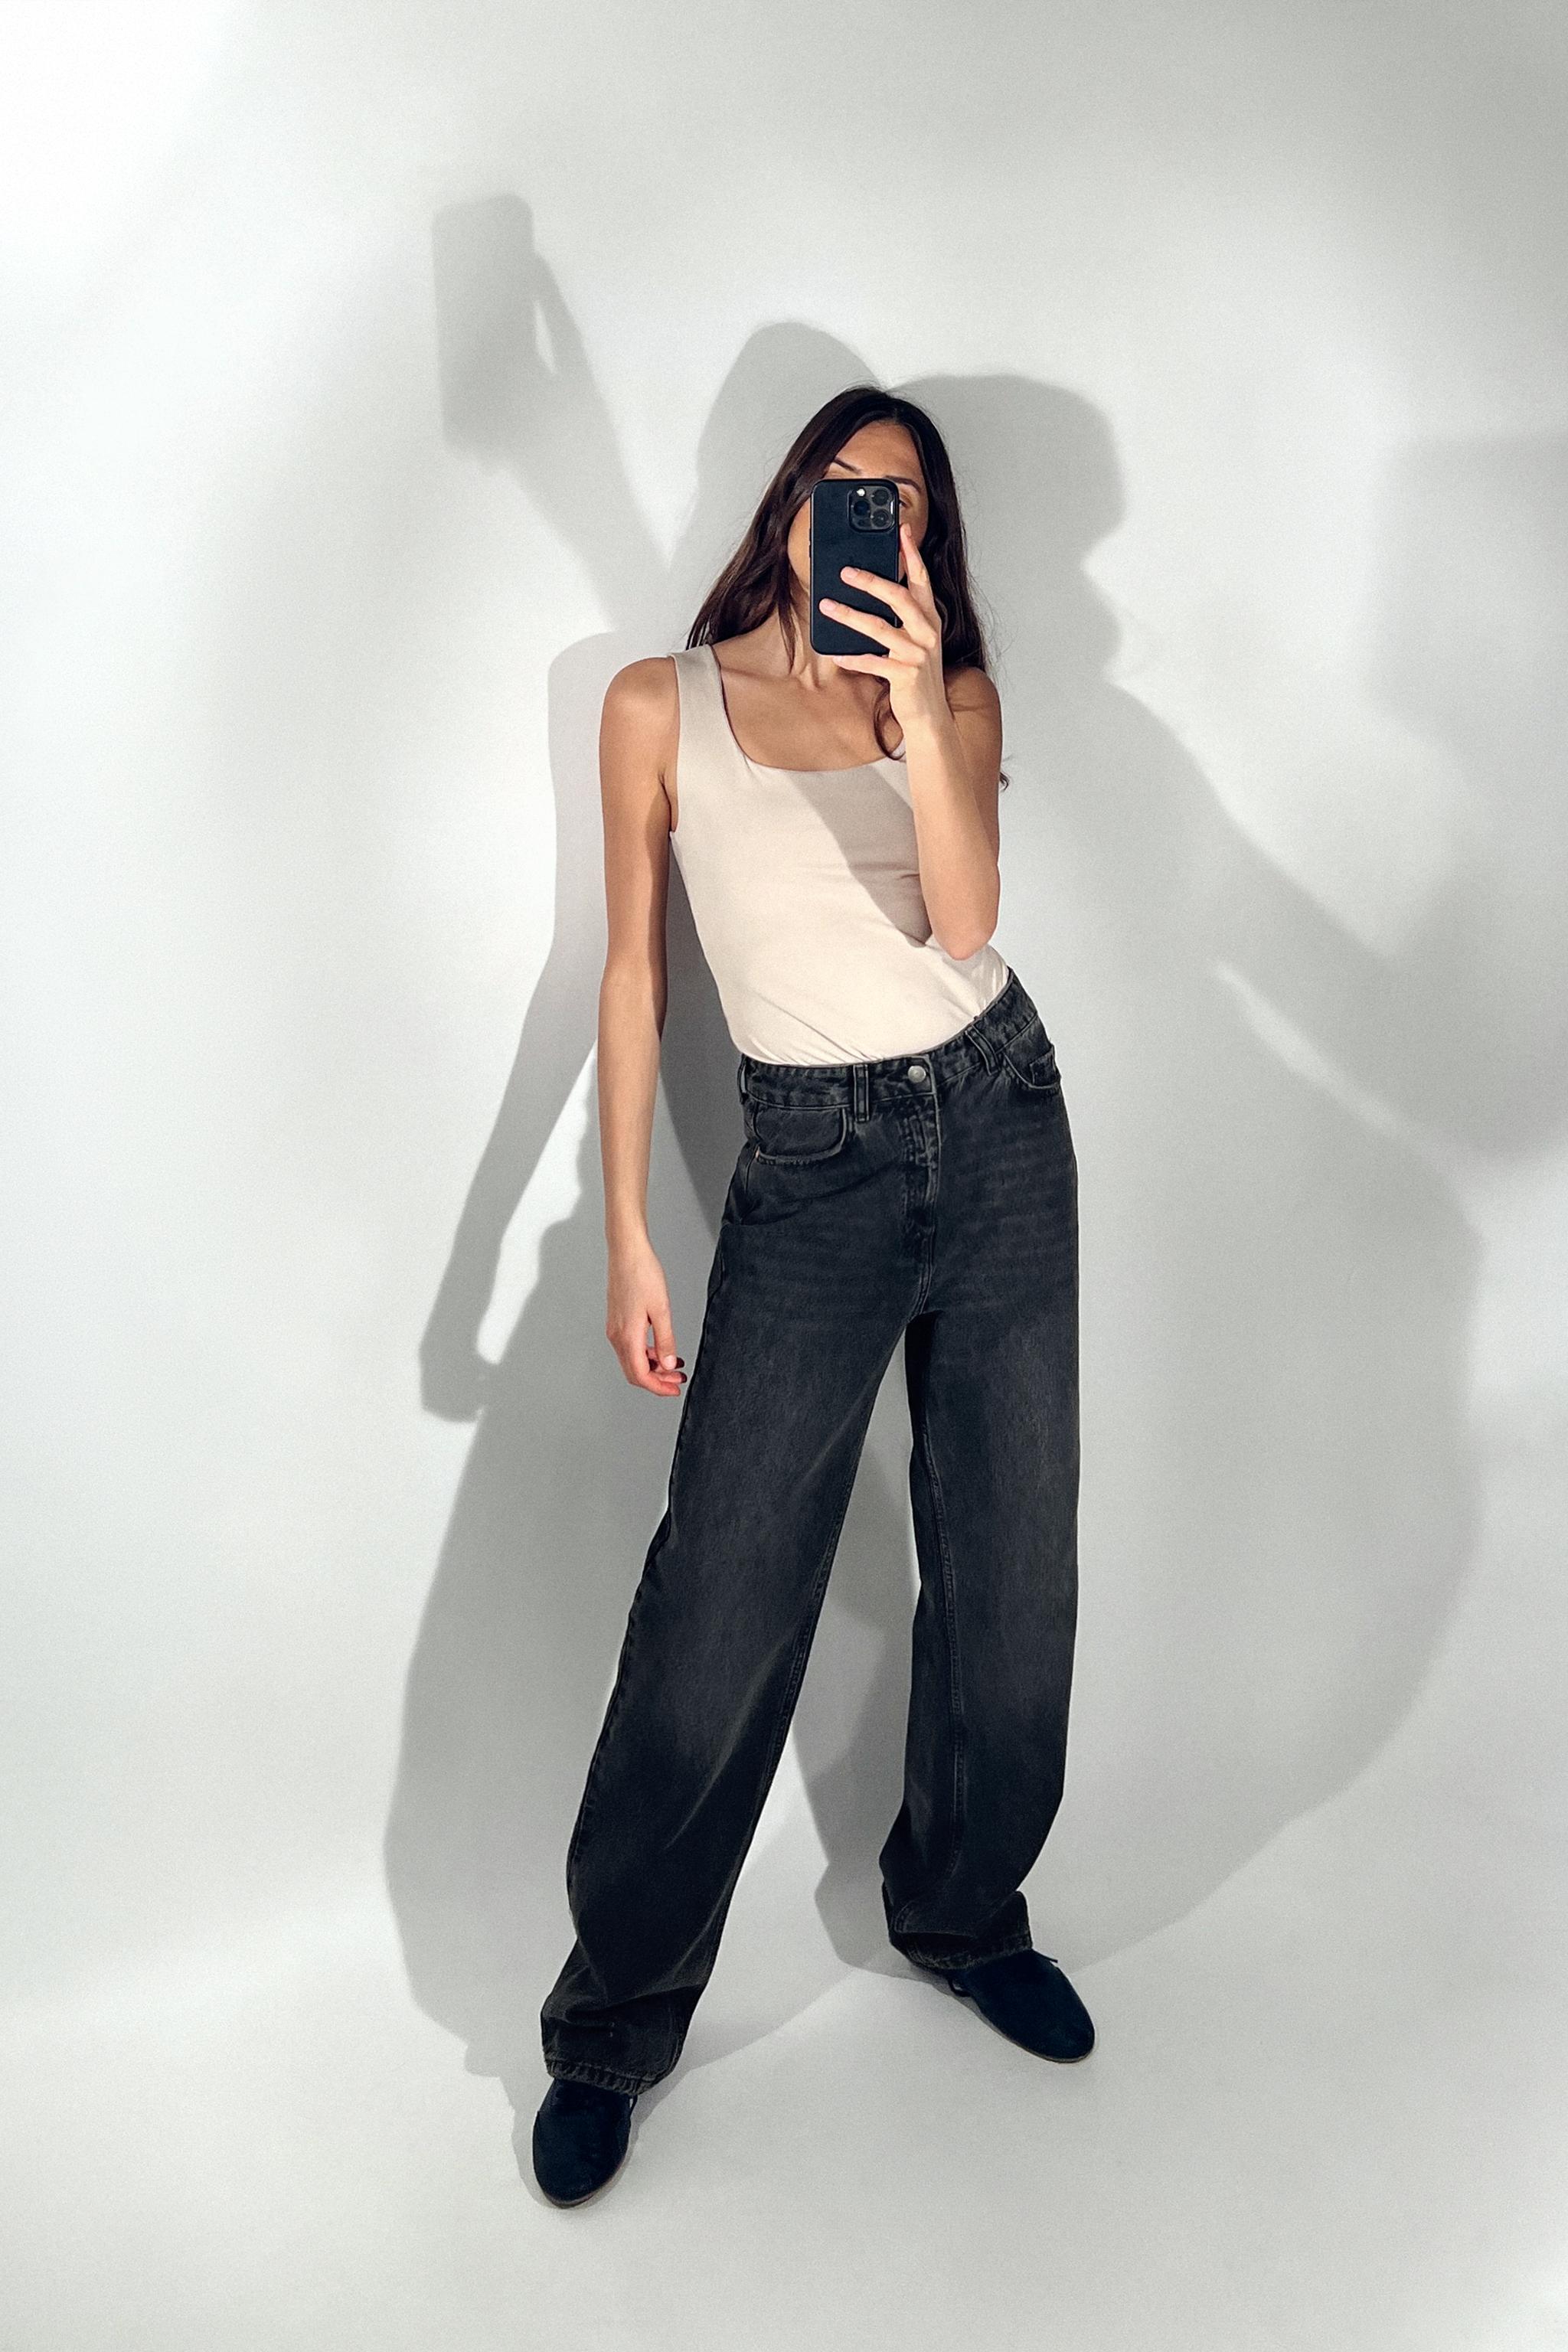 ✨ ▫️Z1975 straight cut pearl JEANS w/a high waist 🏷️6164/227 💶39.95 €, 💵65.90 C$ *saved in highlights “Fall links